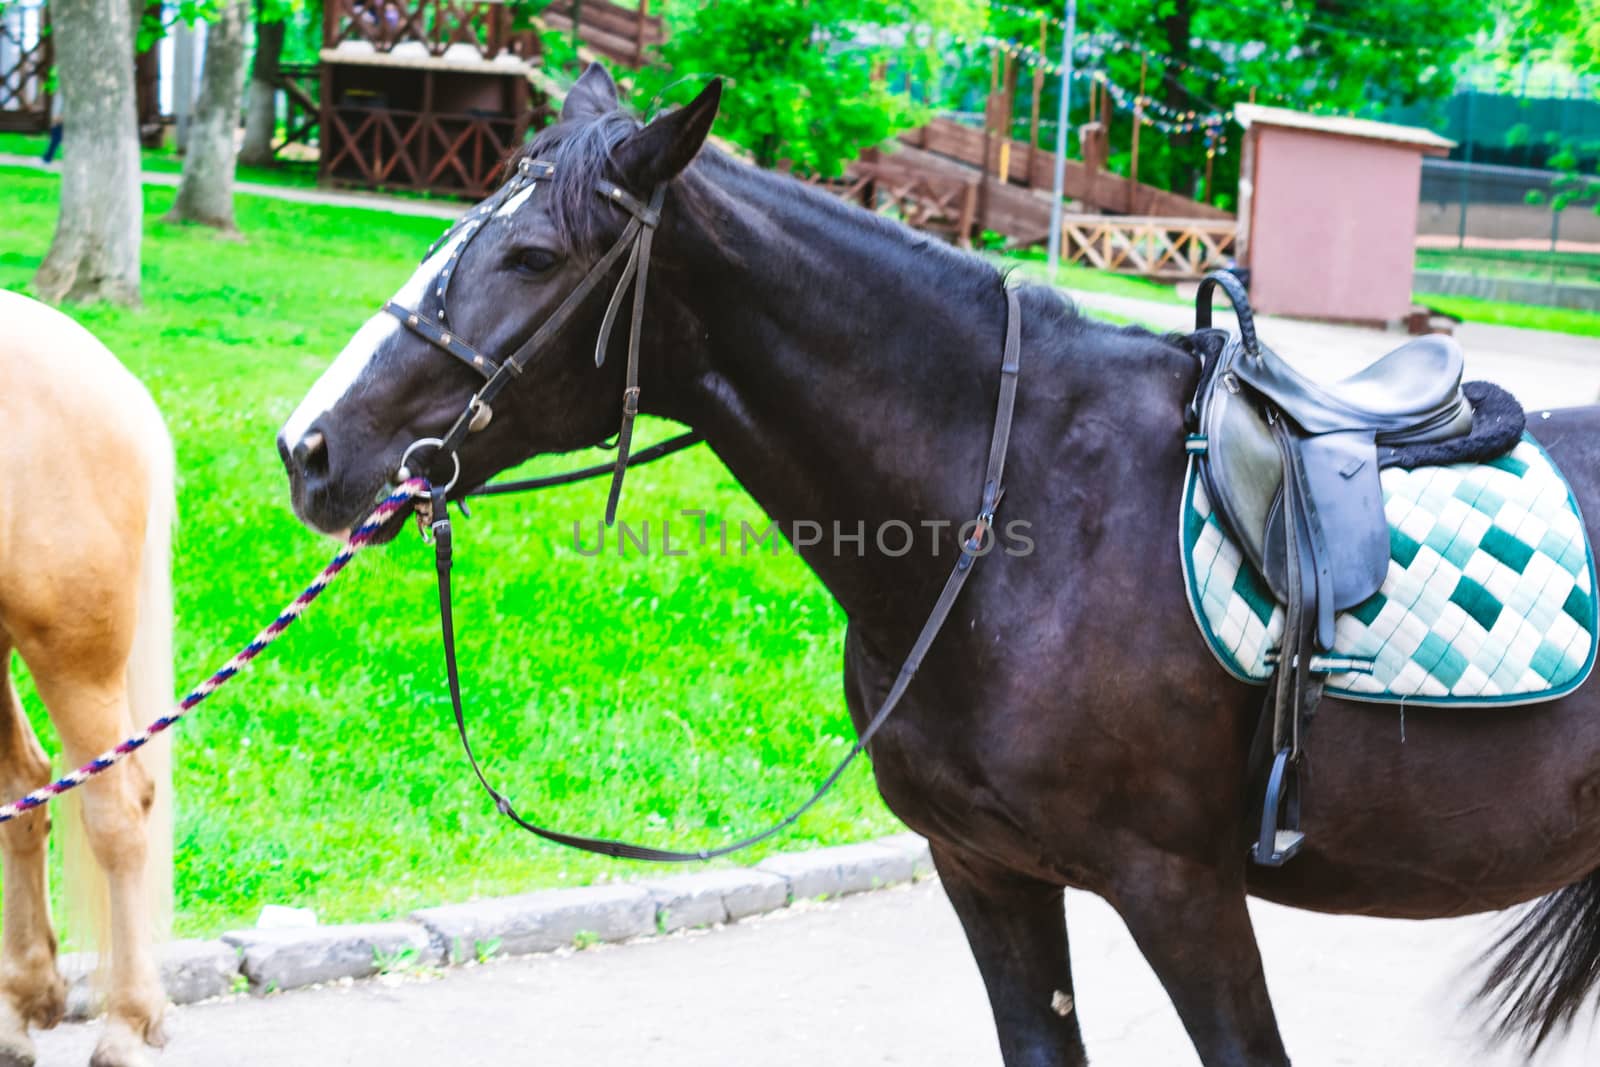 Horses saddled for leisurely riding in the Park